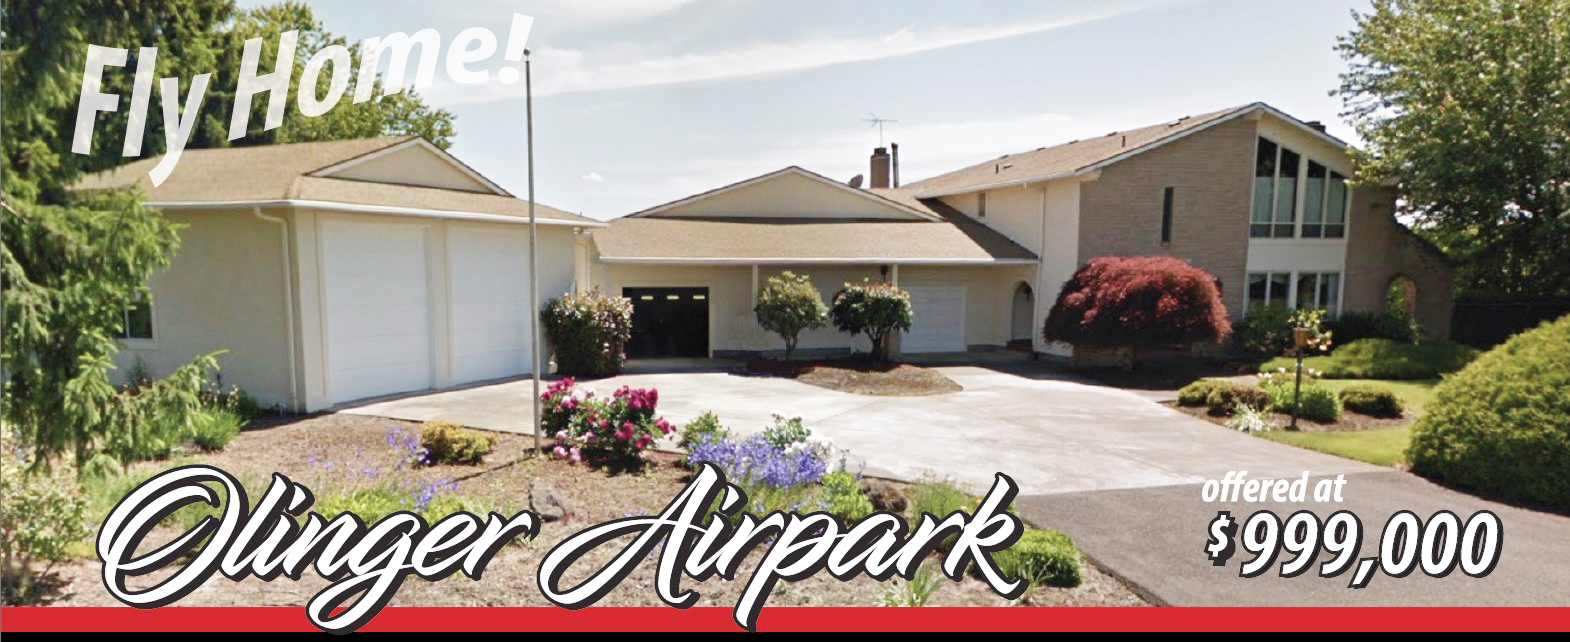 Olinger Airpark Home for Sale